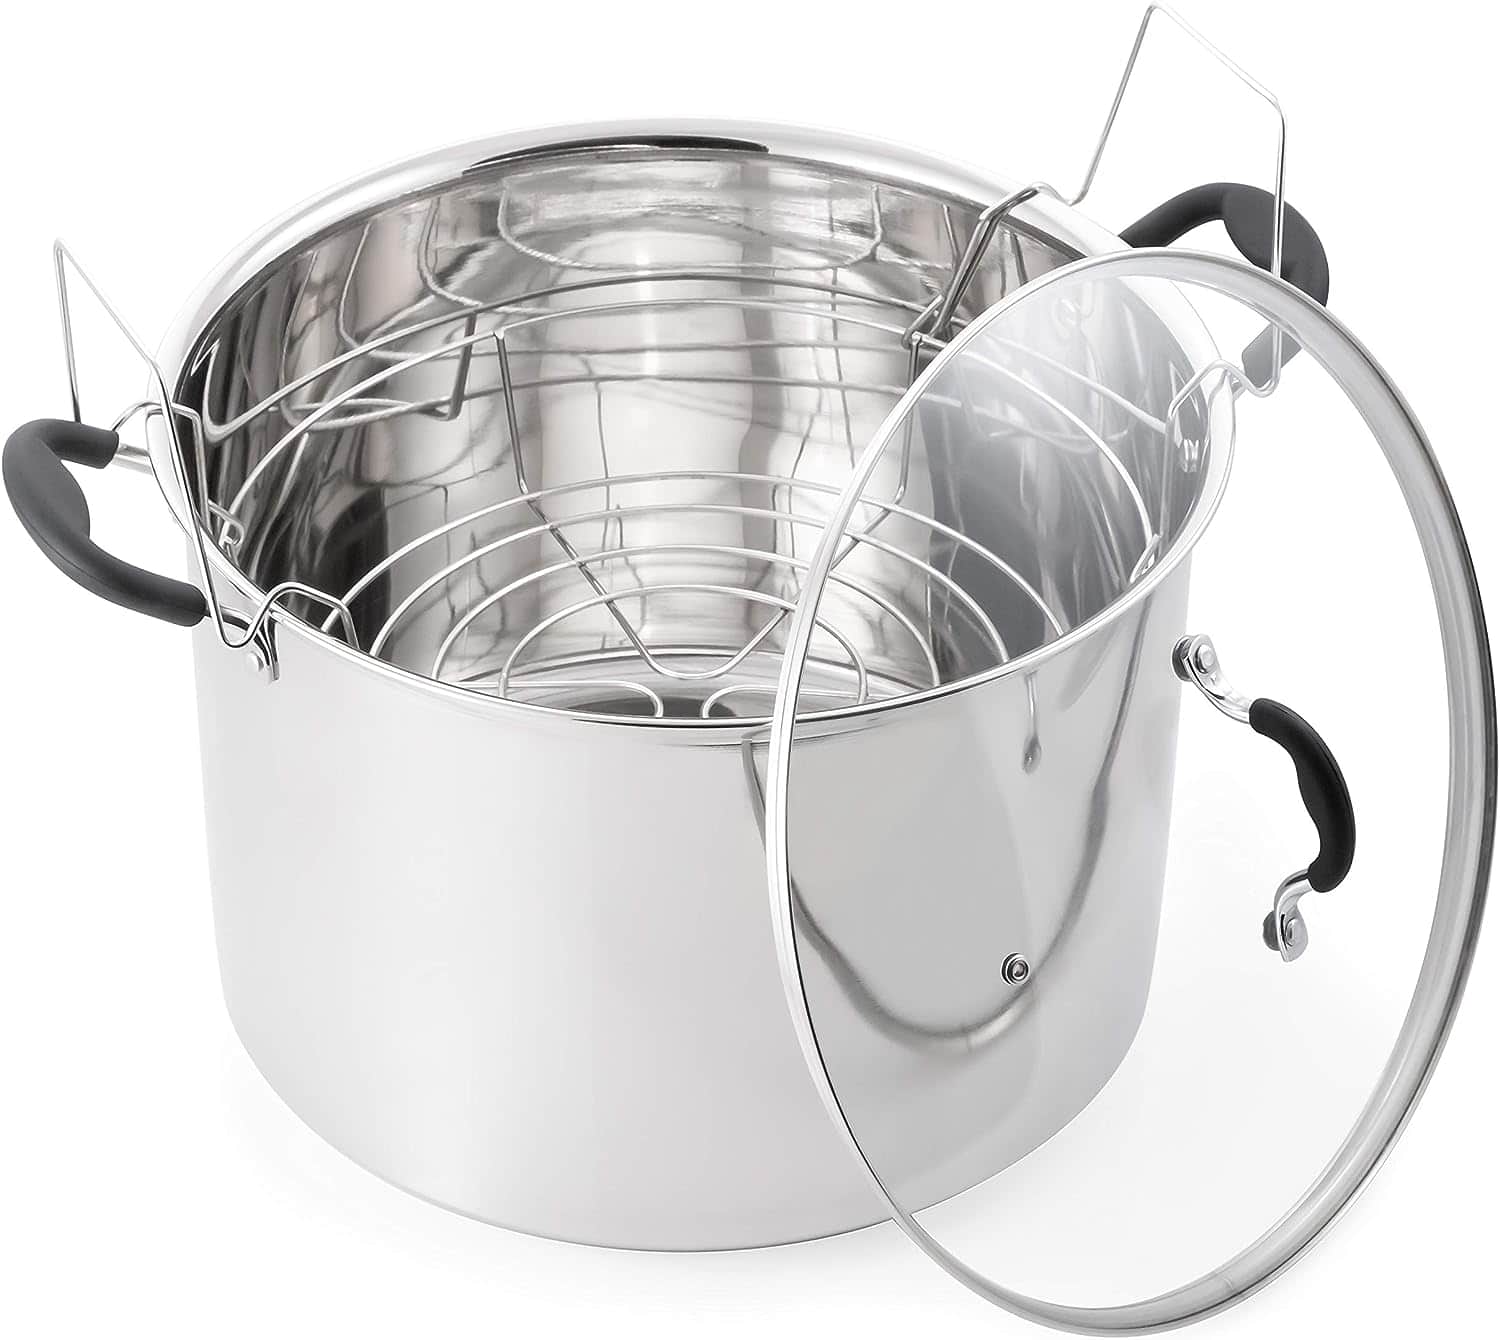 Water Bath Canner with Glass Lid